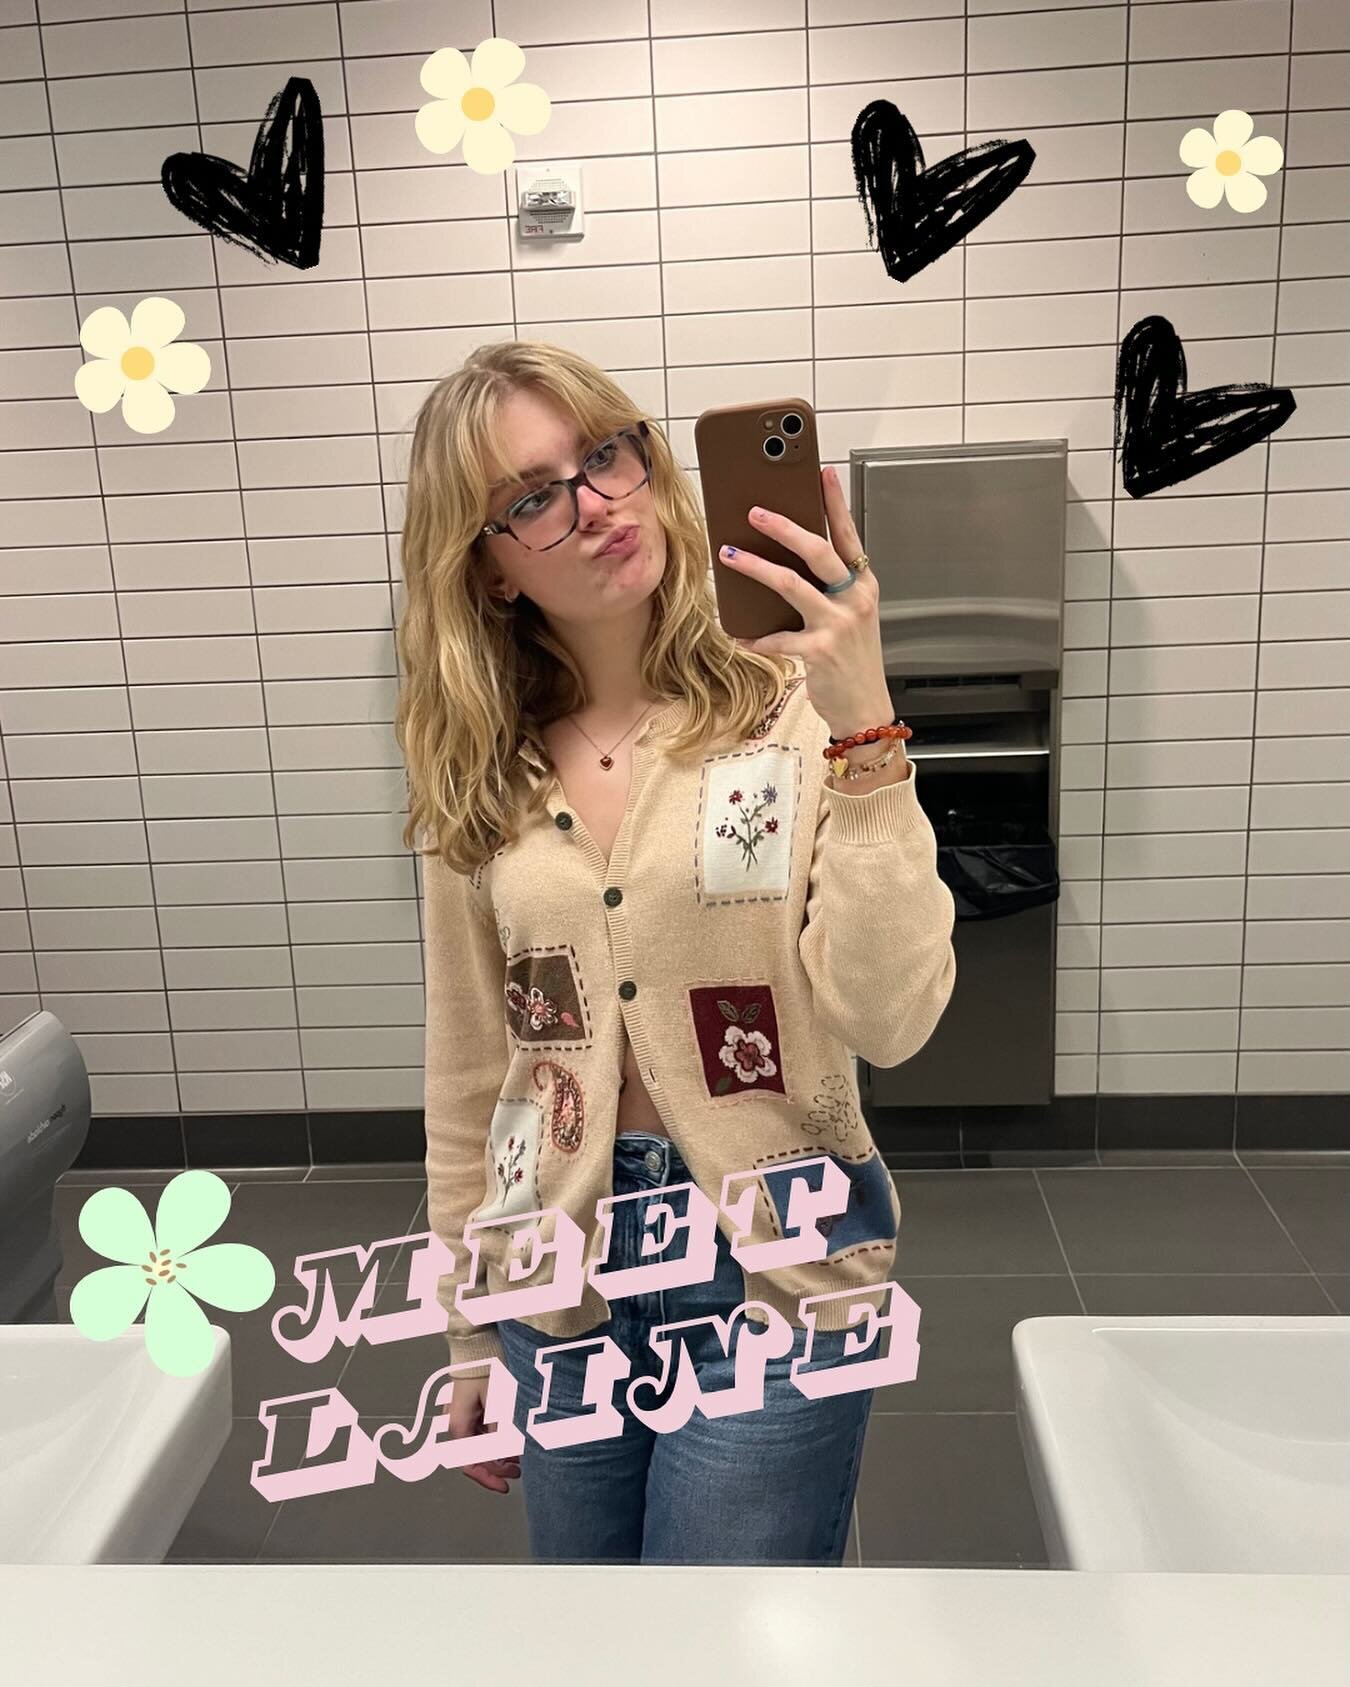 Laine Bottemiller is Moda&rsquo;s Culture Editor! She edits articles in the Culture section, which includes topics on social issues, politics, campus news, travel and more.

Laine Joined Moda in fall of 2021. Her favorite part about Moda is being abl